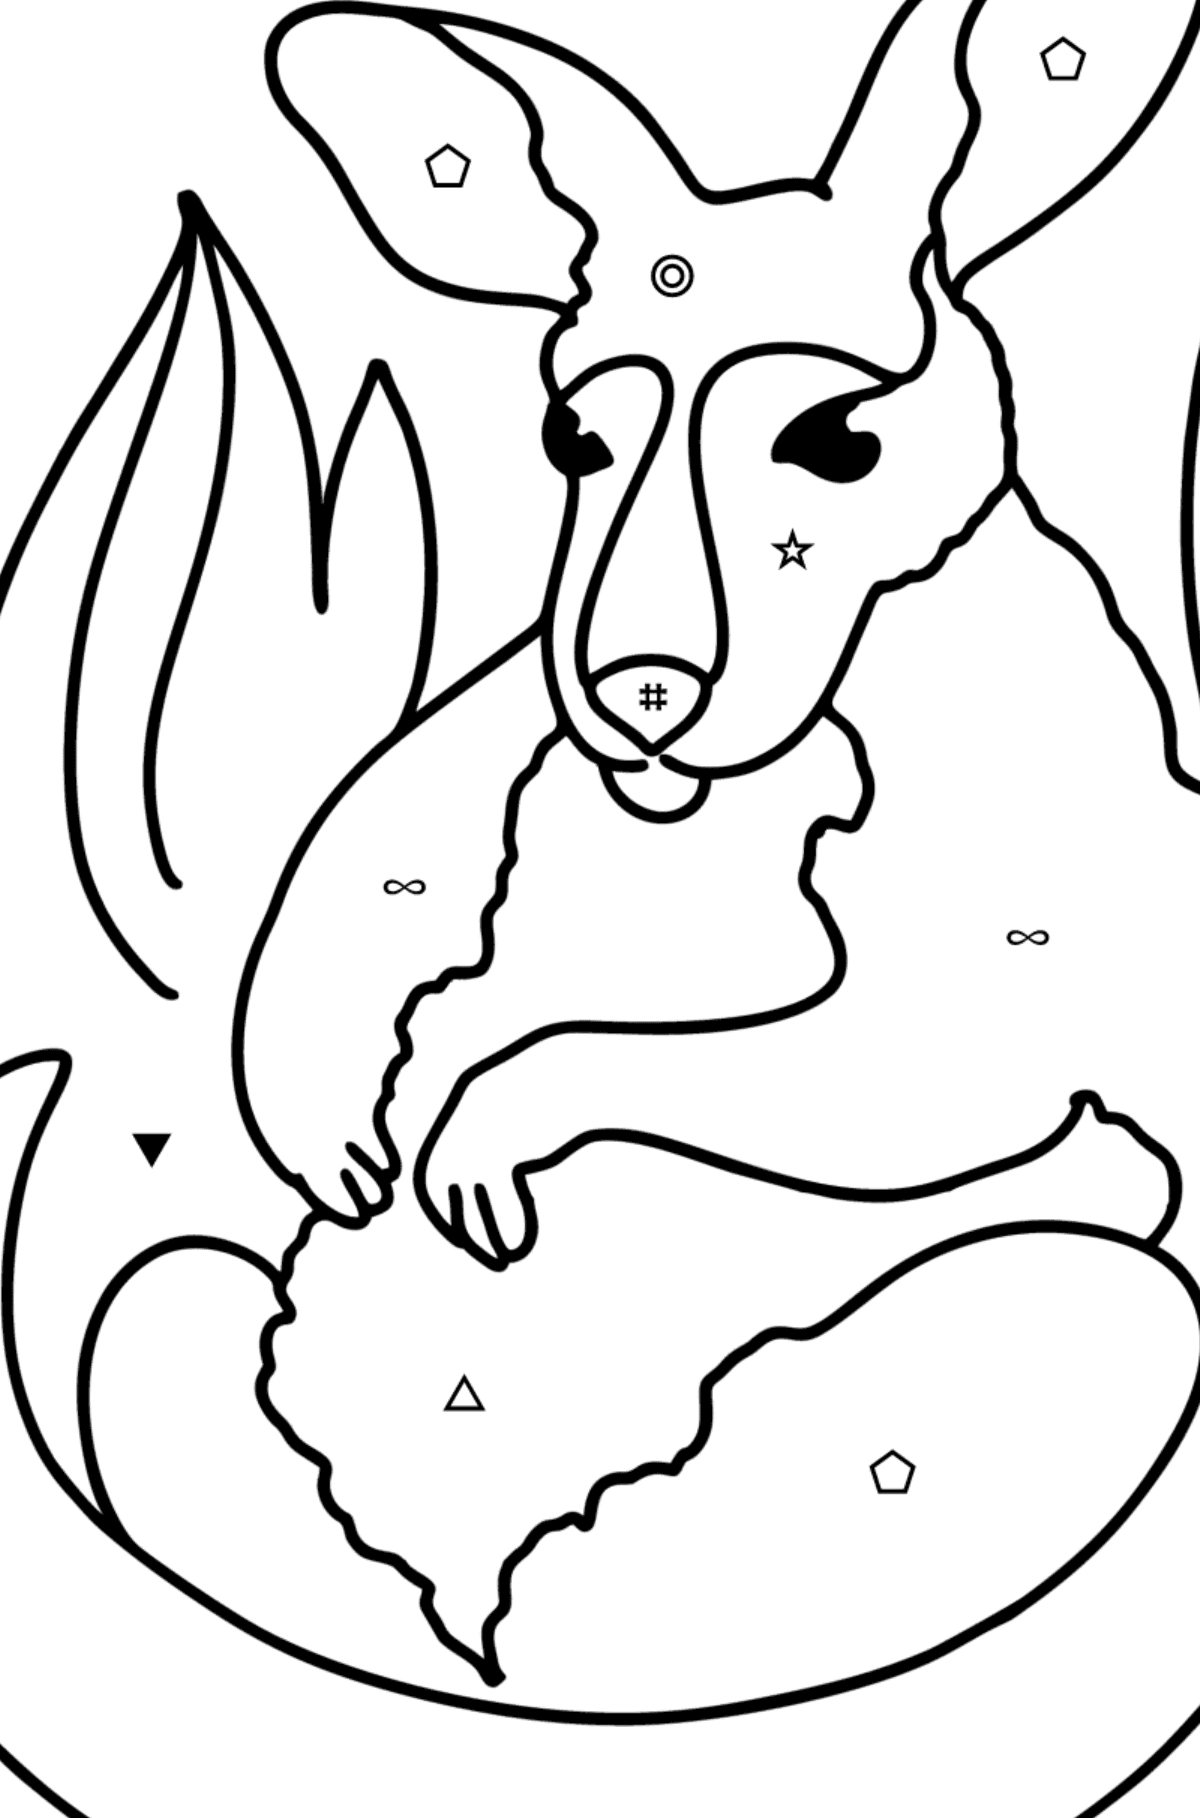 Coloring page - Adorable baby kangaroo - Coloring by Symbols and Geometric Shapes for Kids